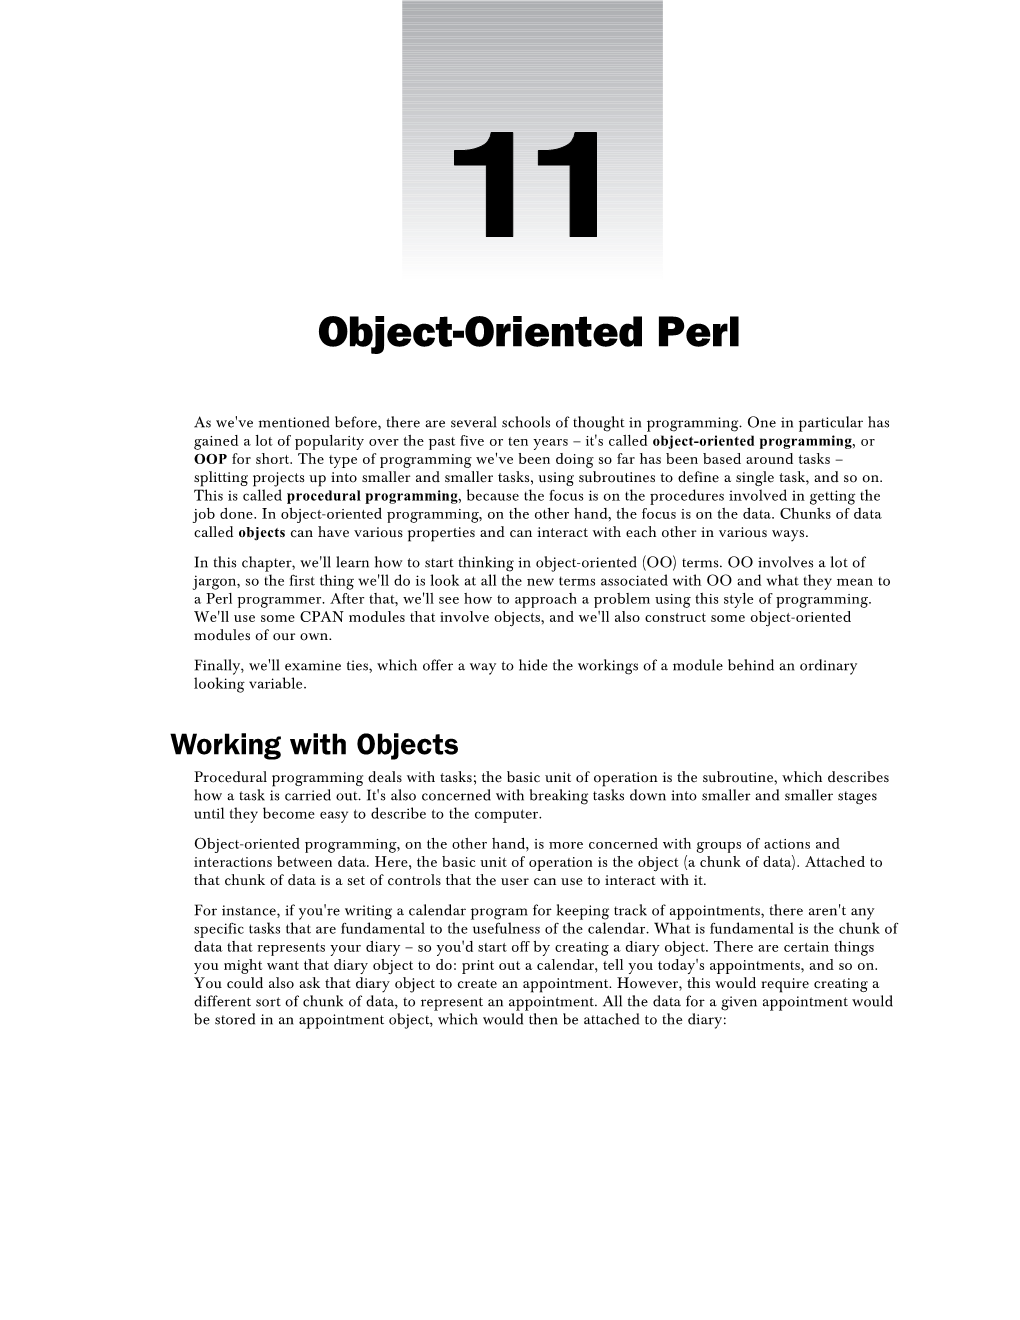 Object-Oriented Perl